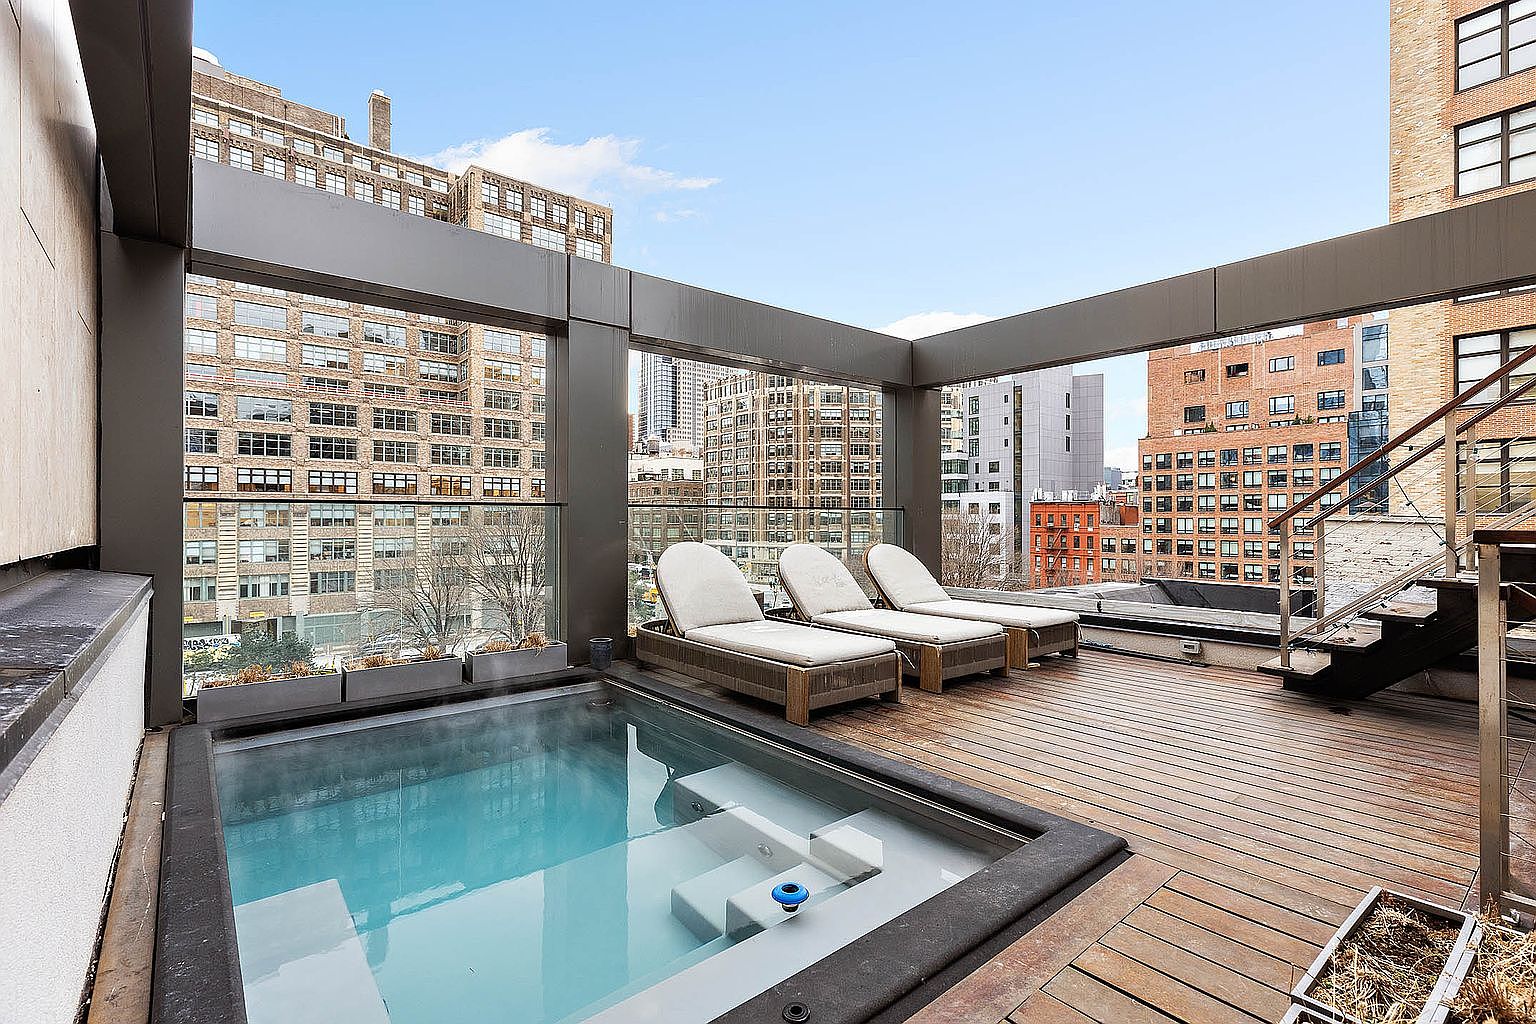 574 Broome St PENTHOUSE A, New York, NY 10013